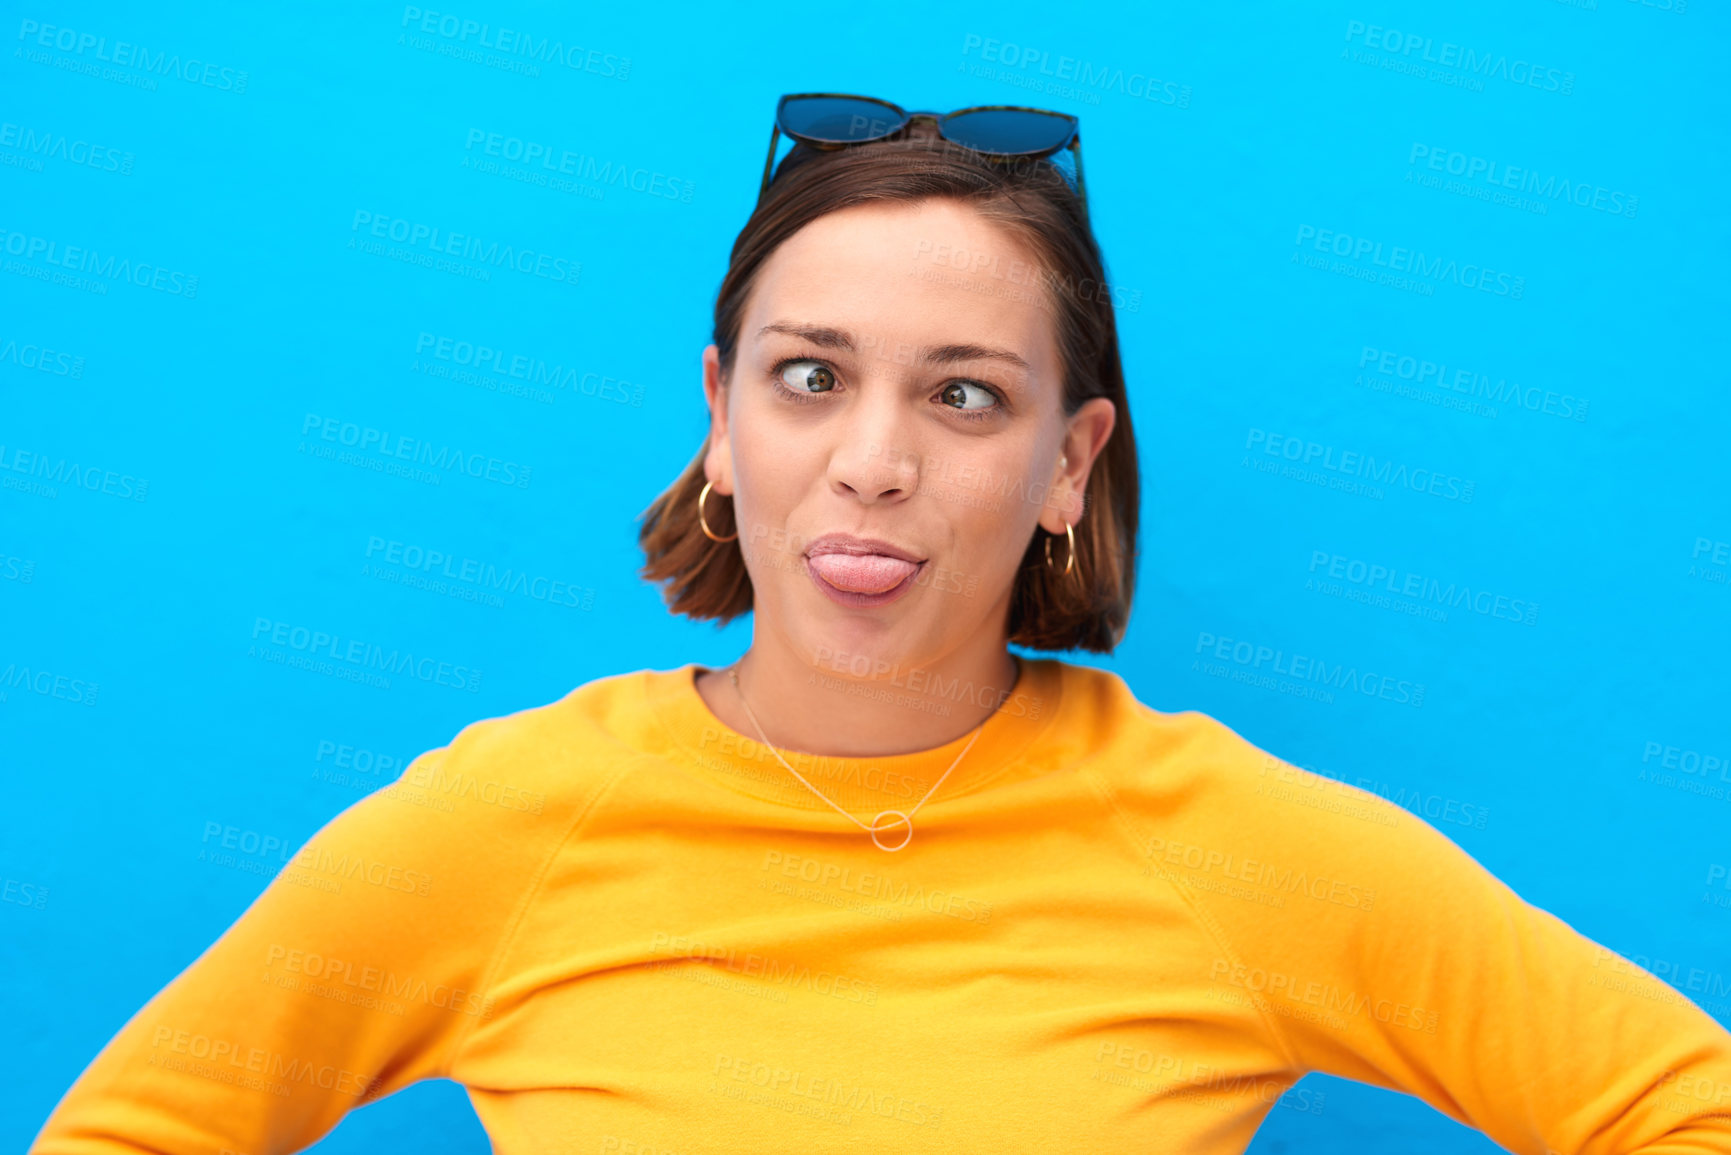 Buy stock photo Cropped shot of a young woman making faces against a blue background